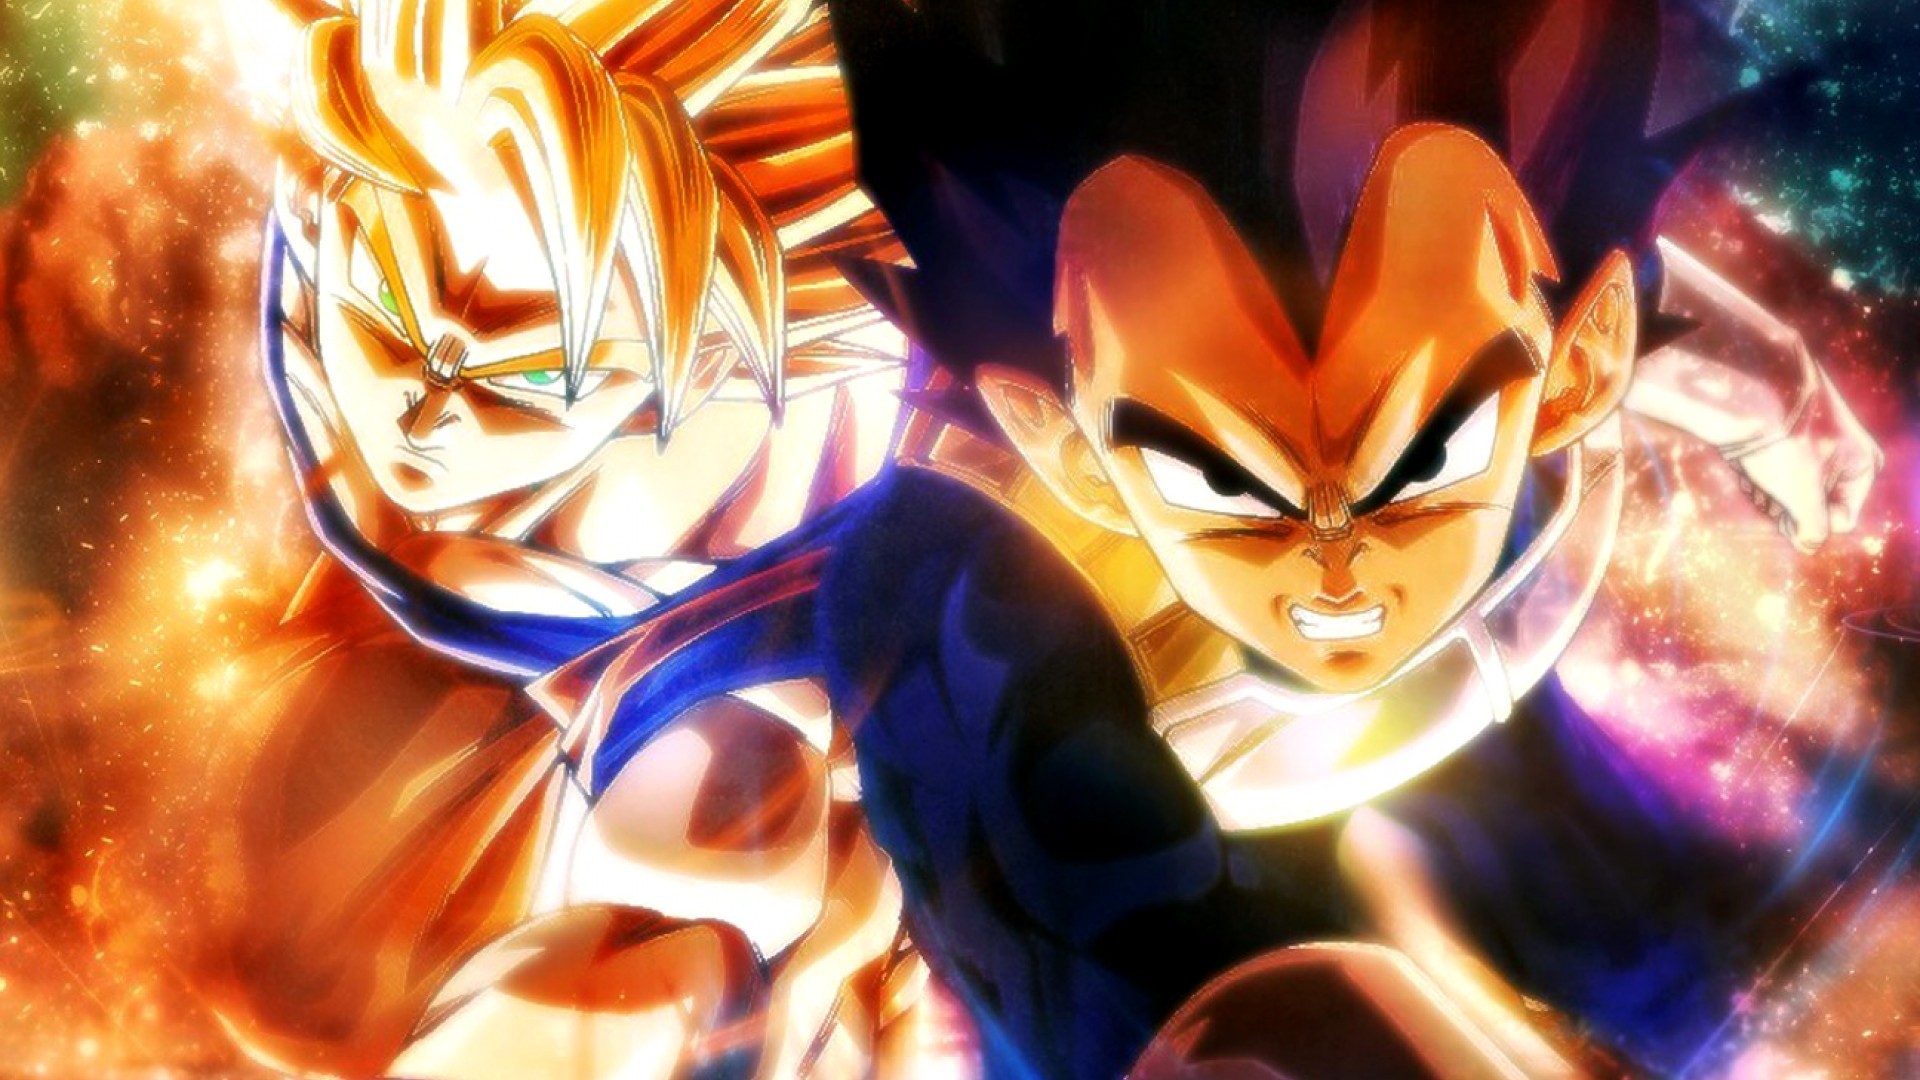 Goku Super Saiyan HD Wallpaper With Resolution 1920X1080 pixel. You can make this wallpaper for your Desktop Computer Backgrounds, Mac Wallpapers, Android Lock screen or iPhone Screensavers